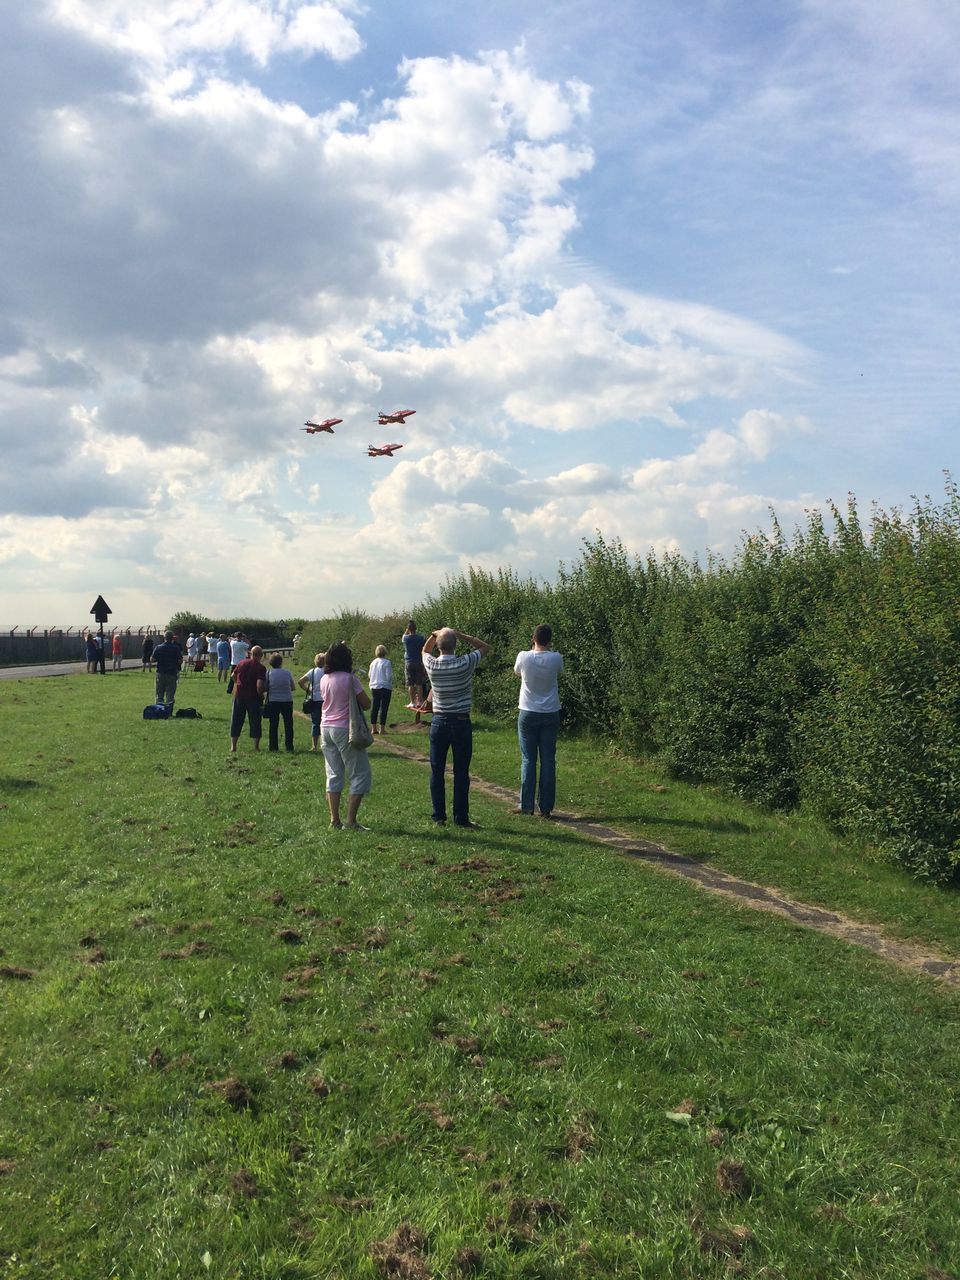 cloud - sky, sky, grass, flying, plant, nature, real people, group of people, transportation, men, field, air vehicle, land, day, airplane, people, leisure activity, green color, mode of transportation, outdoors